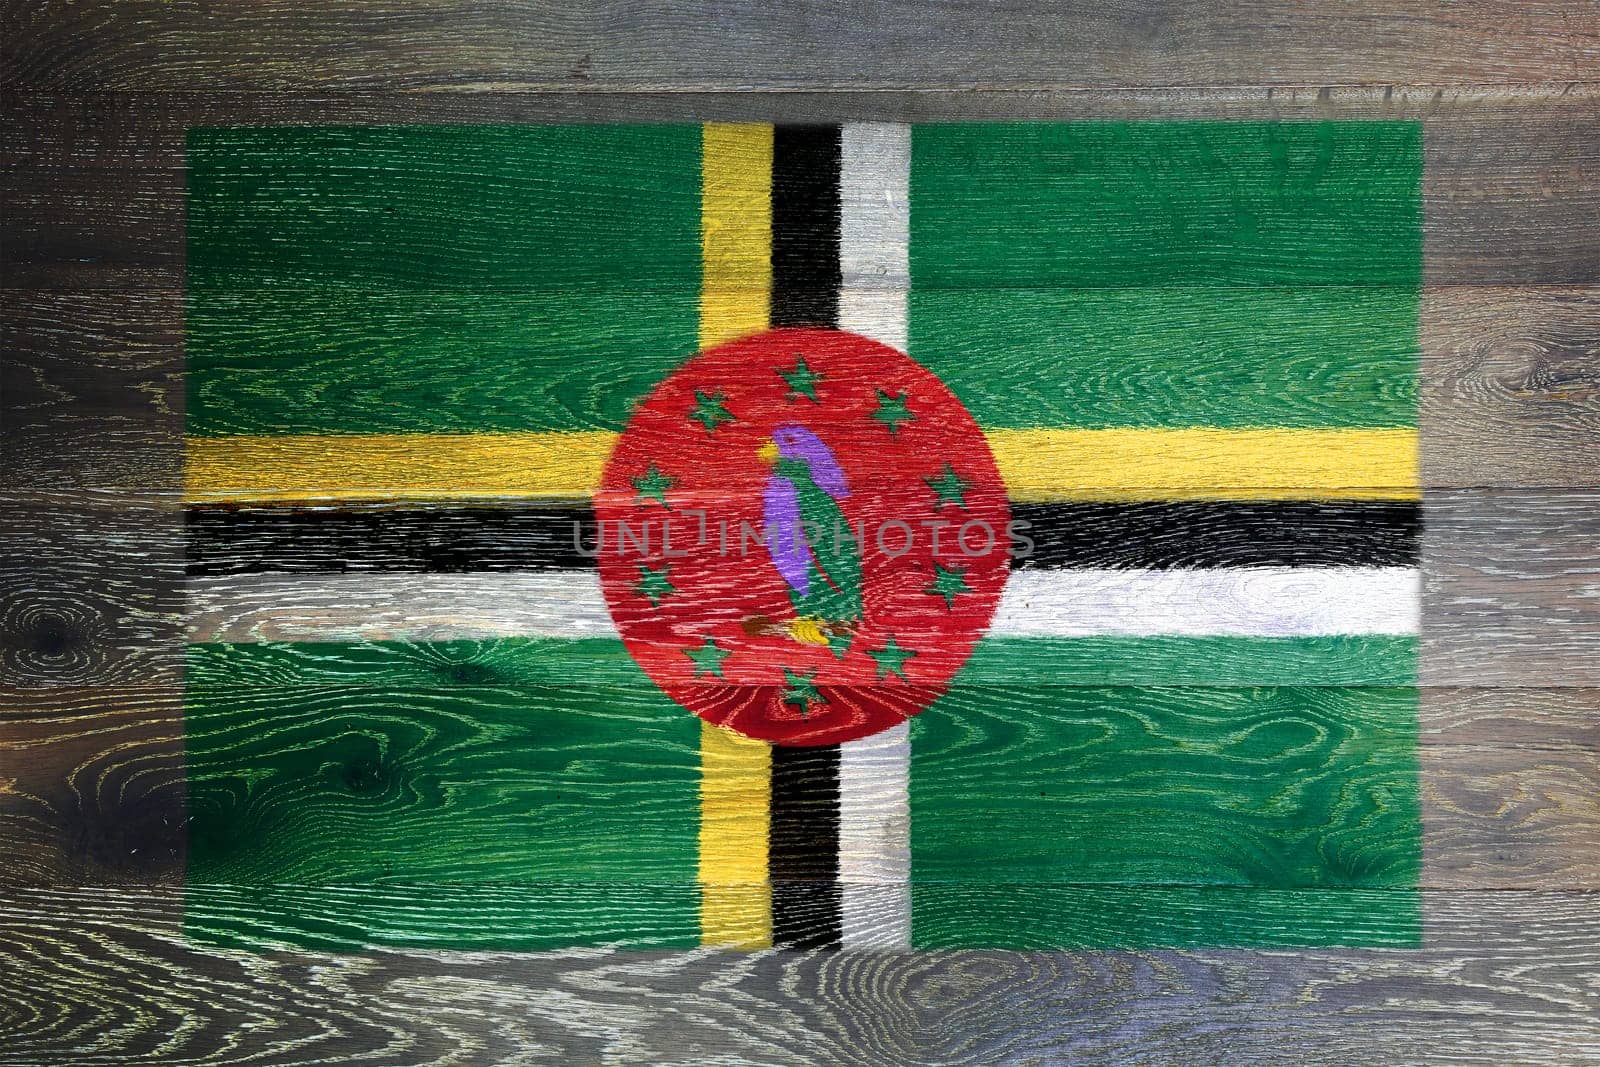 Dominica flag on rustic old wood surface background by VivacityImages